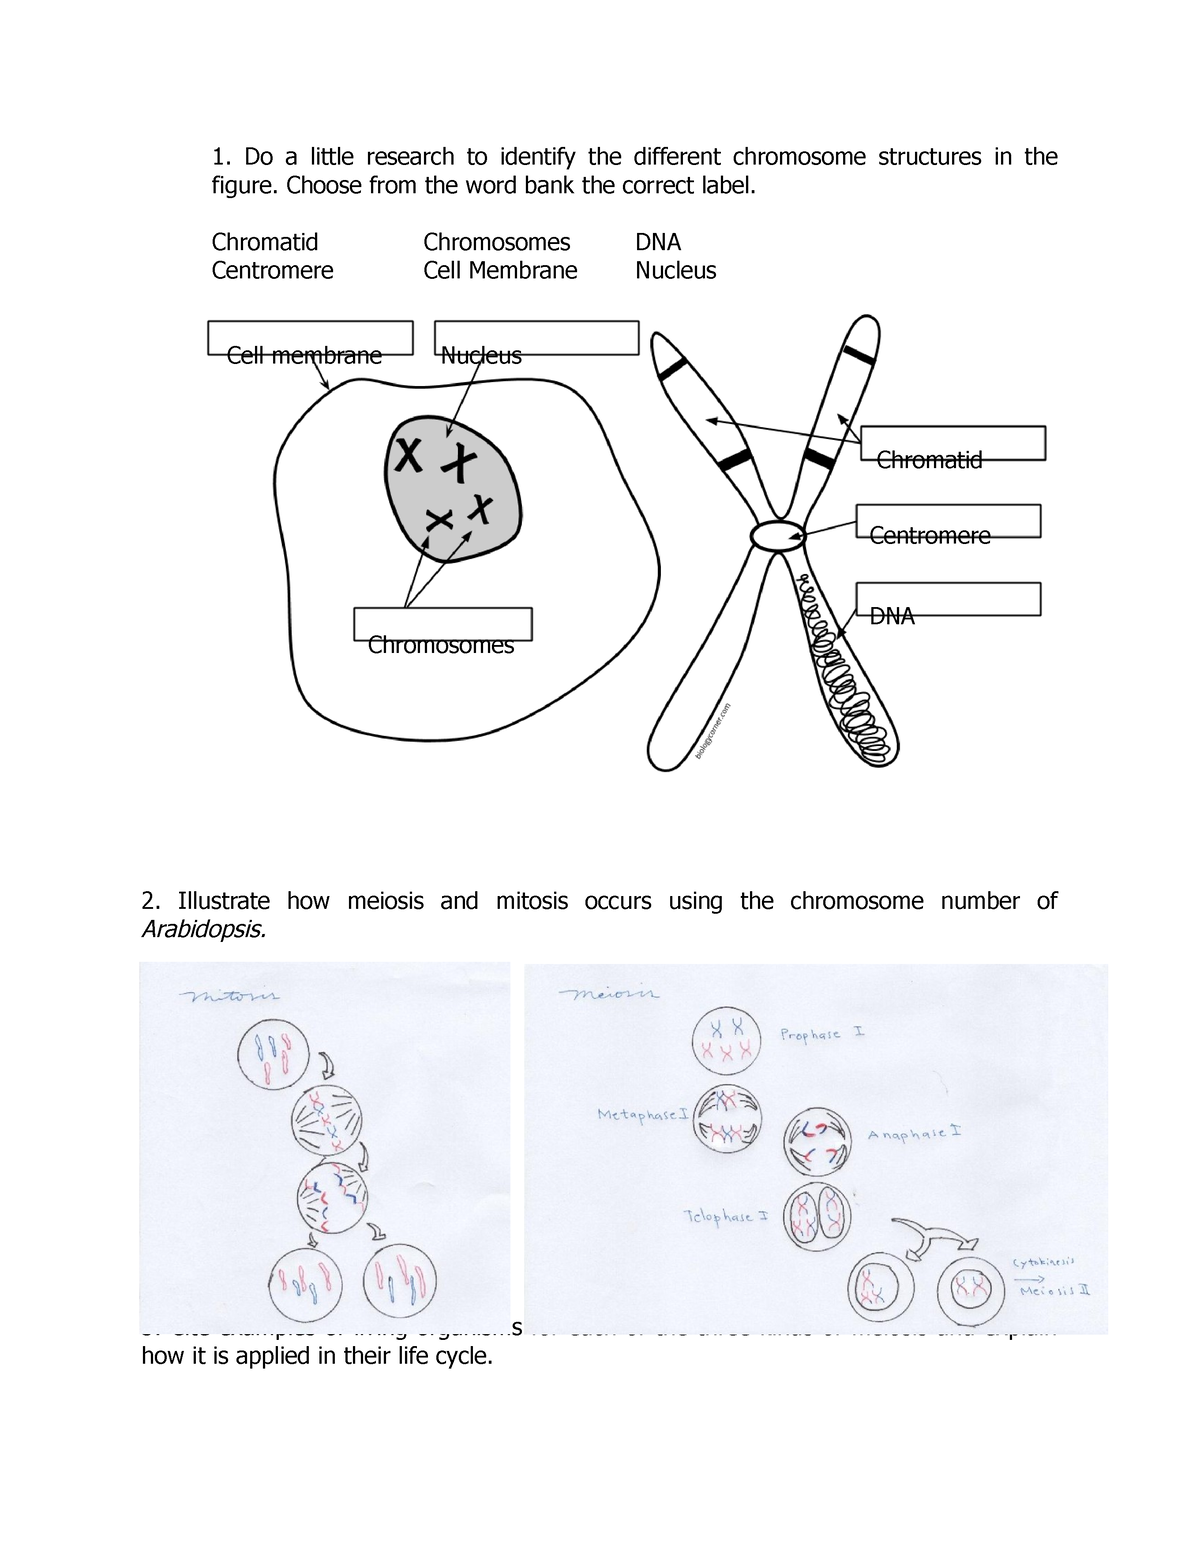 module-2-assignment-chromosome-structures-in-the-figure-do-a-little-research-to-identify-the